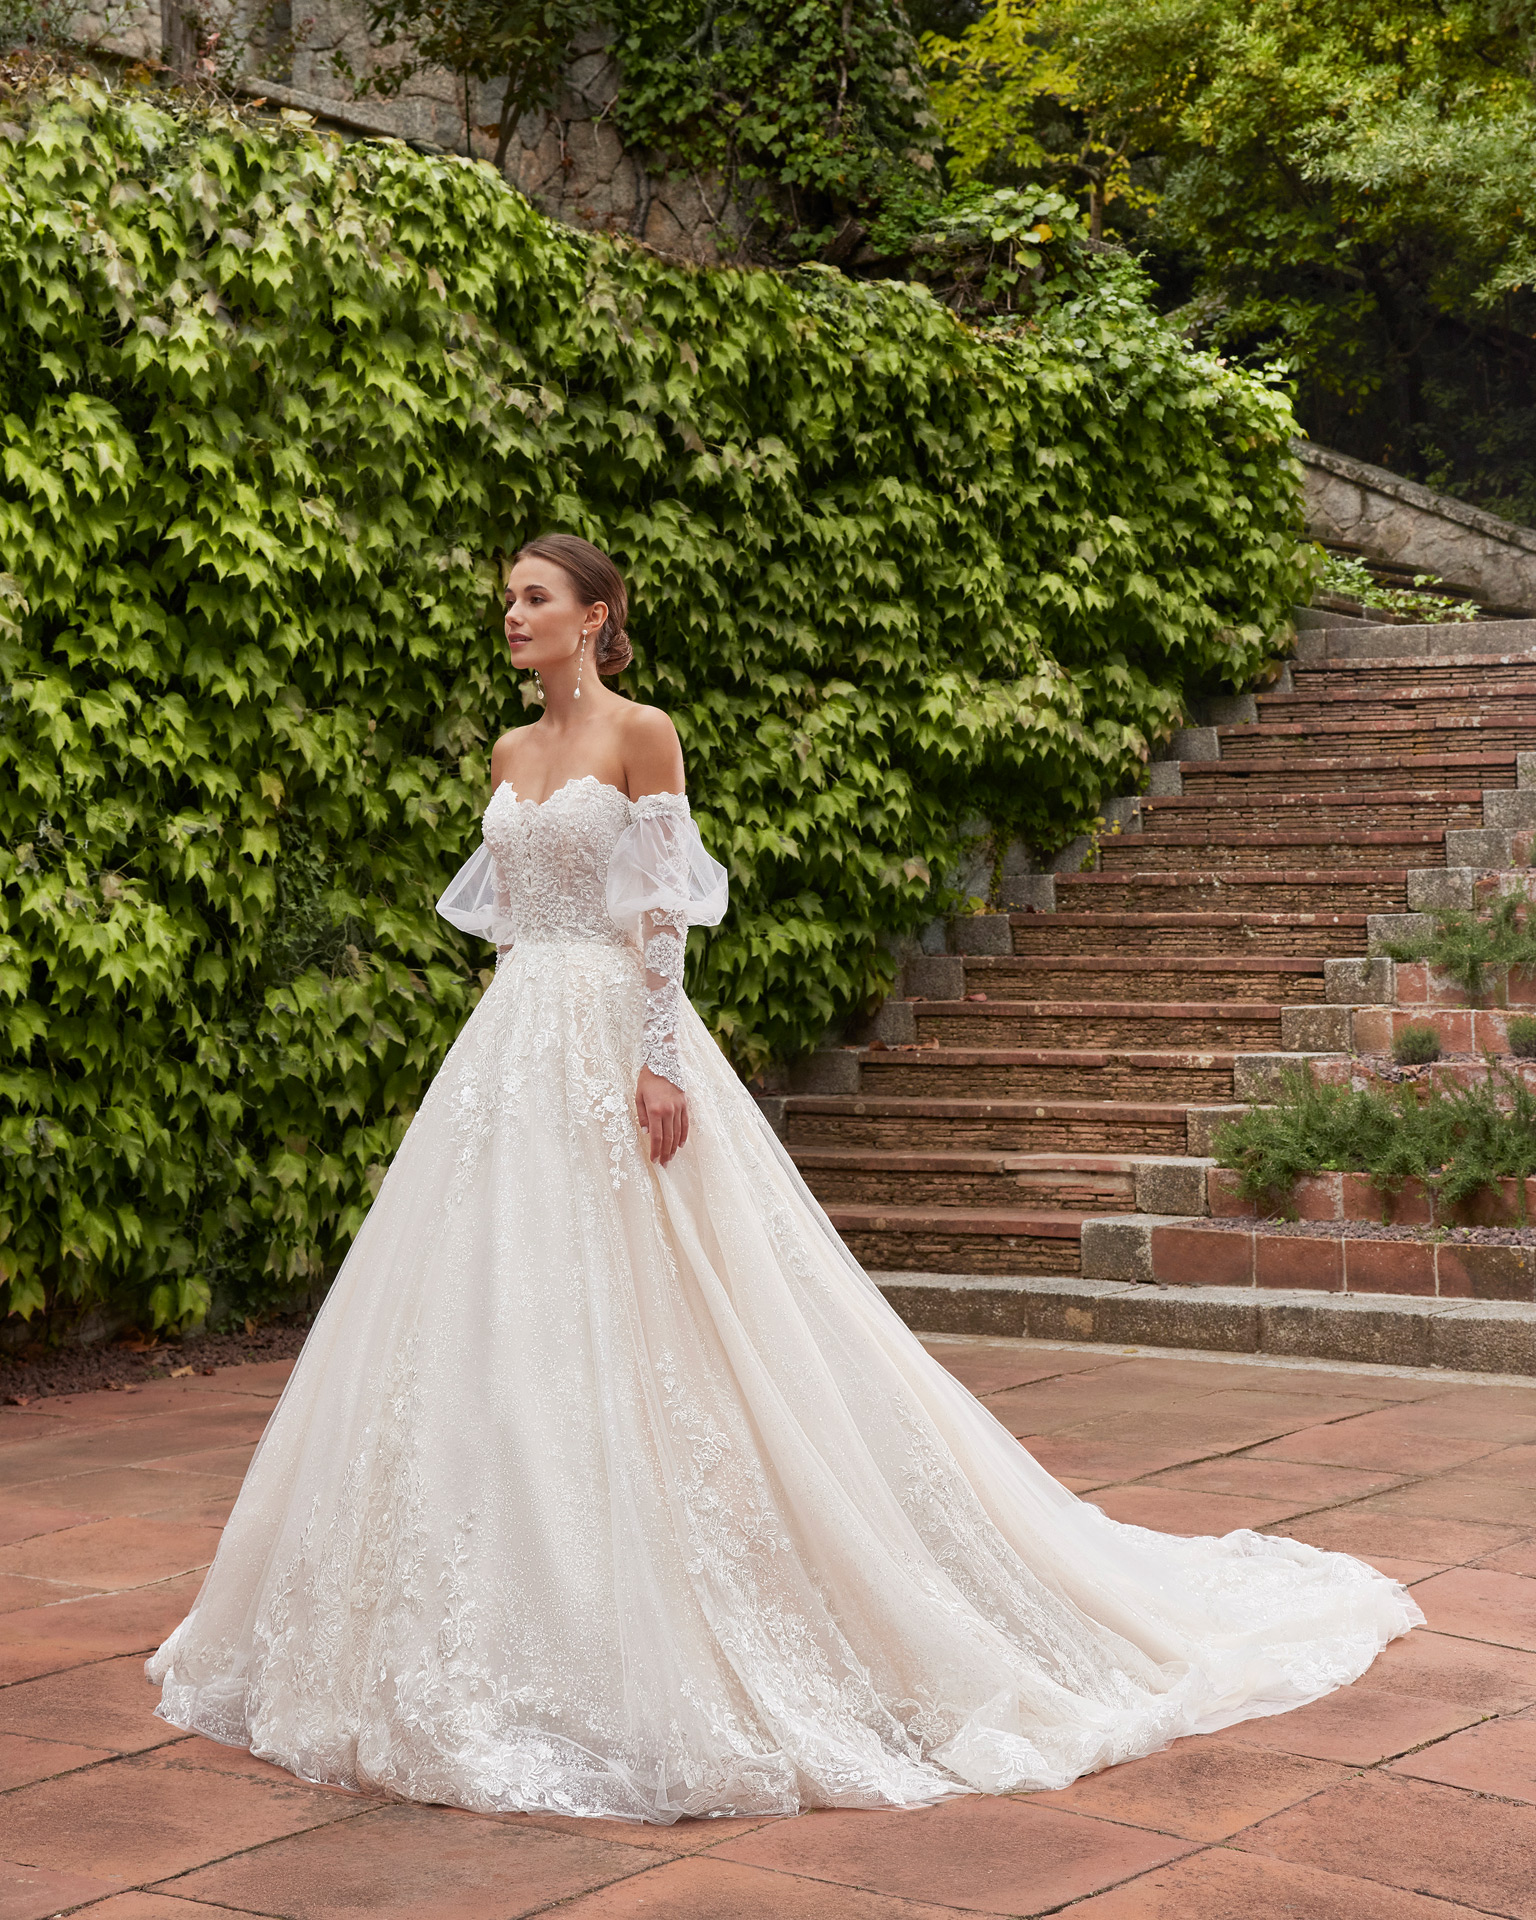 Romantic princess wedding dress, made with lace and beadwork. Showcase a sweetheart neckline, corset back and detachable sleeves in this dreamy Luna Studio outfit. LUNA_NOVIAS.